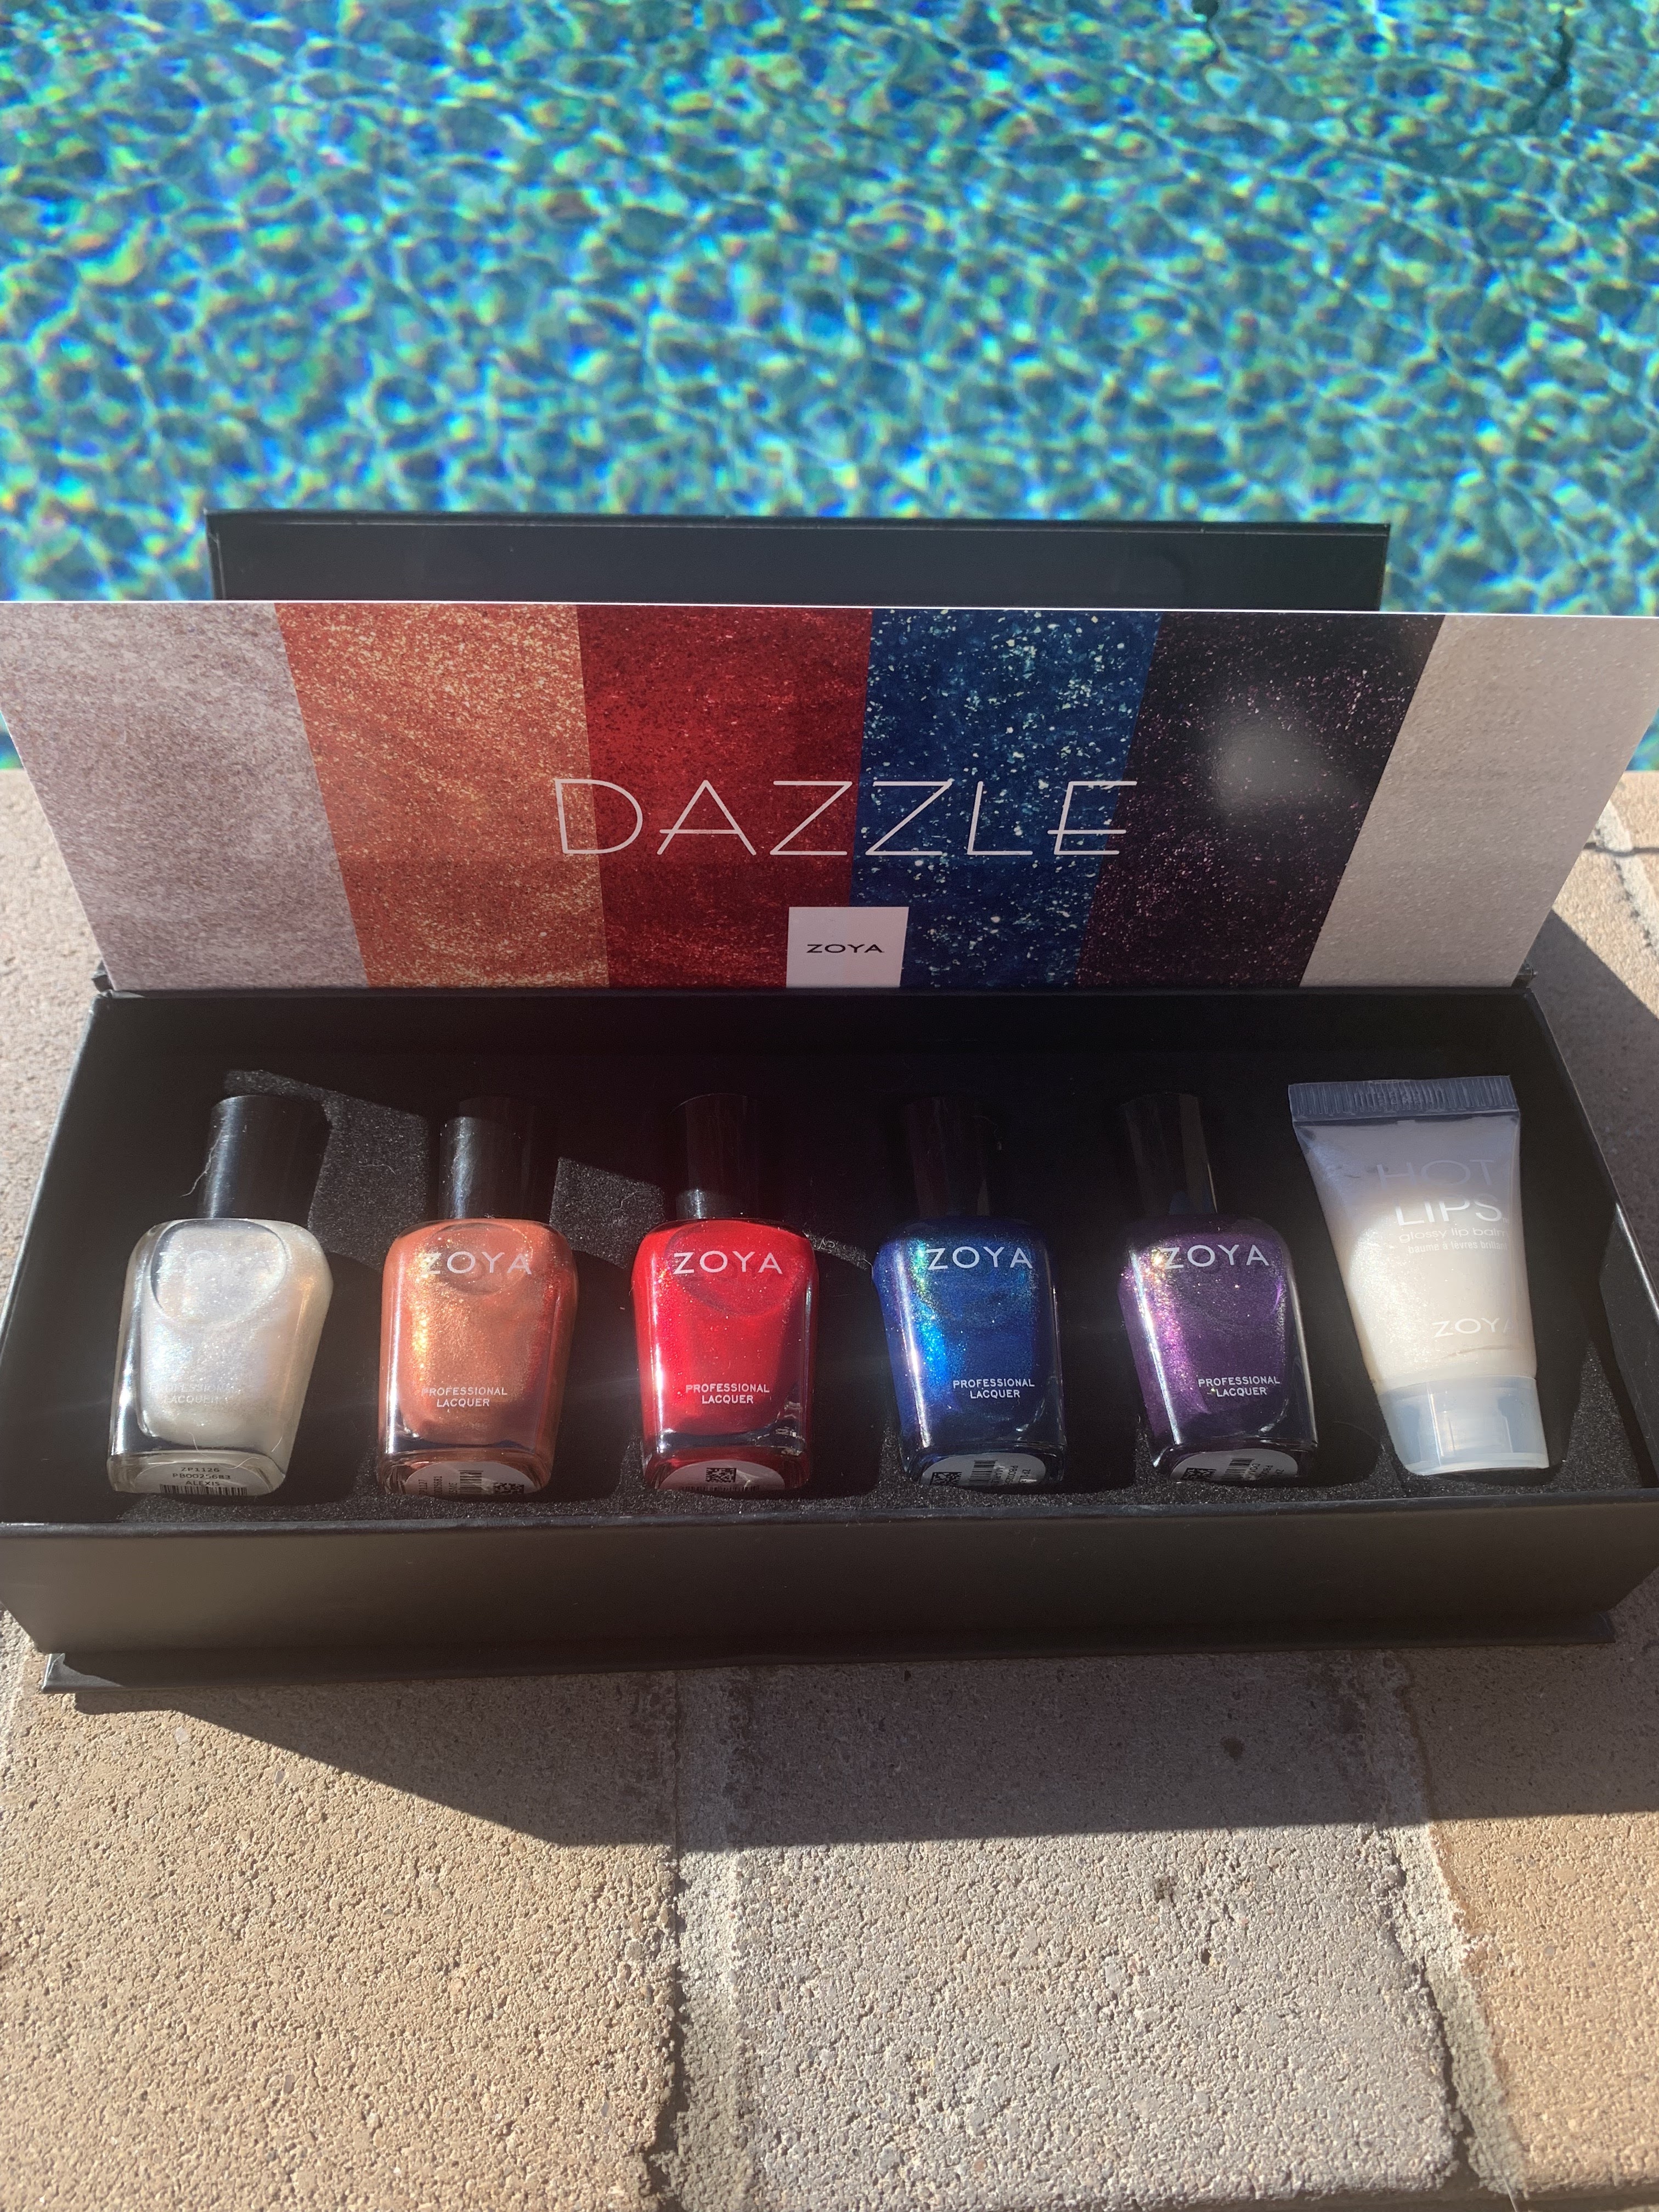 Zoya Holiday 2021 Dazzle Swatches and Review - The Shades Of U